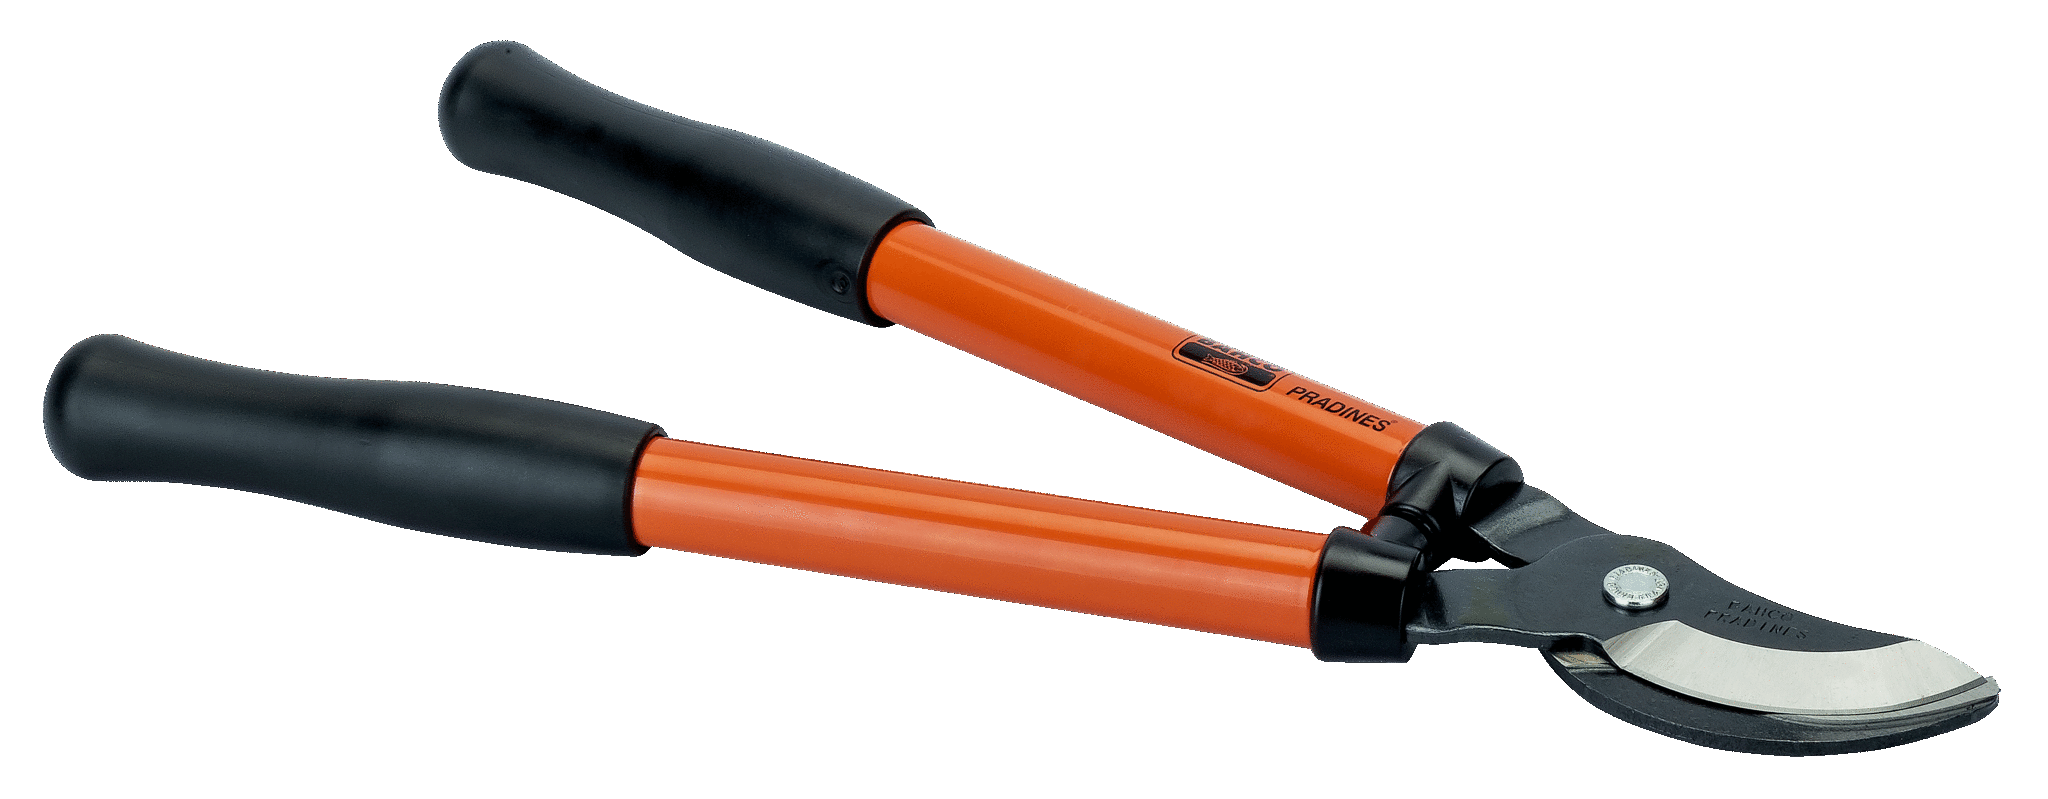 Loppers 35 mm Bypass Loppers with Steel Handle | BAHCO | Bahco International